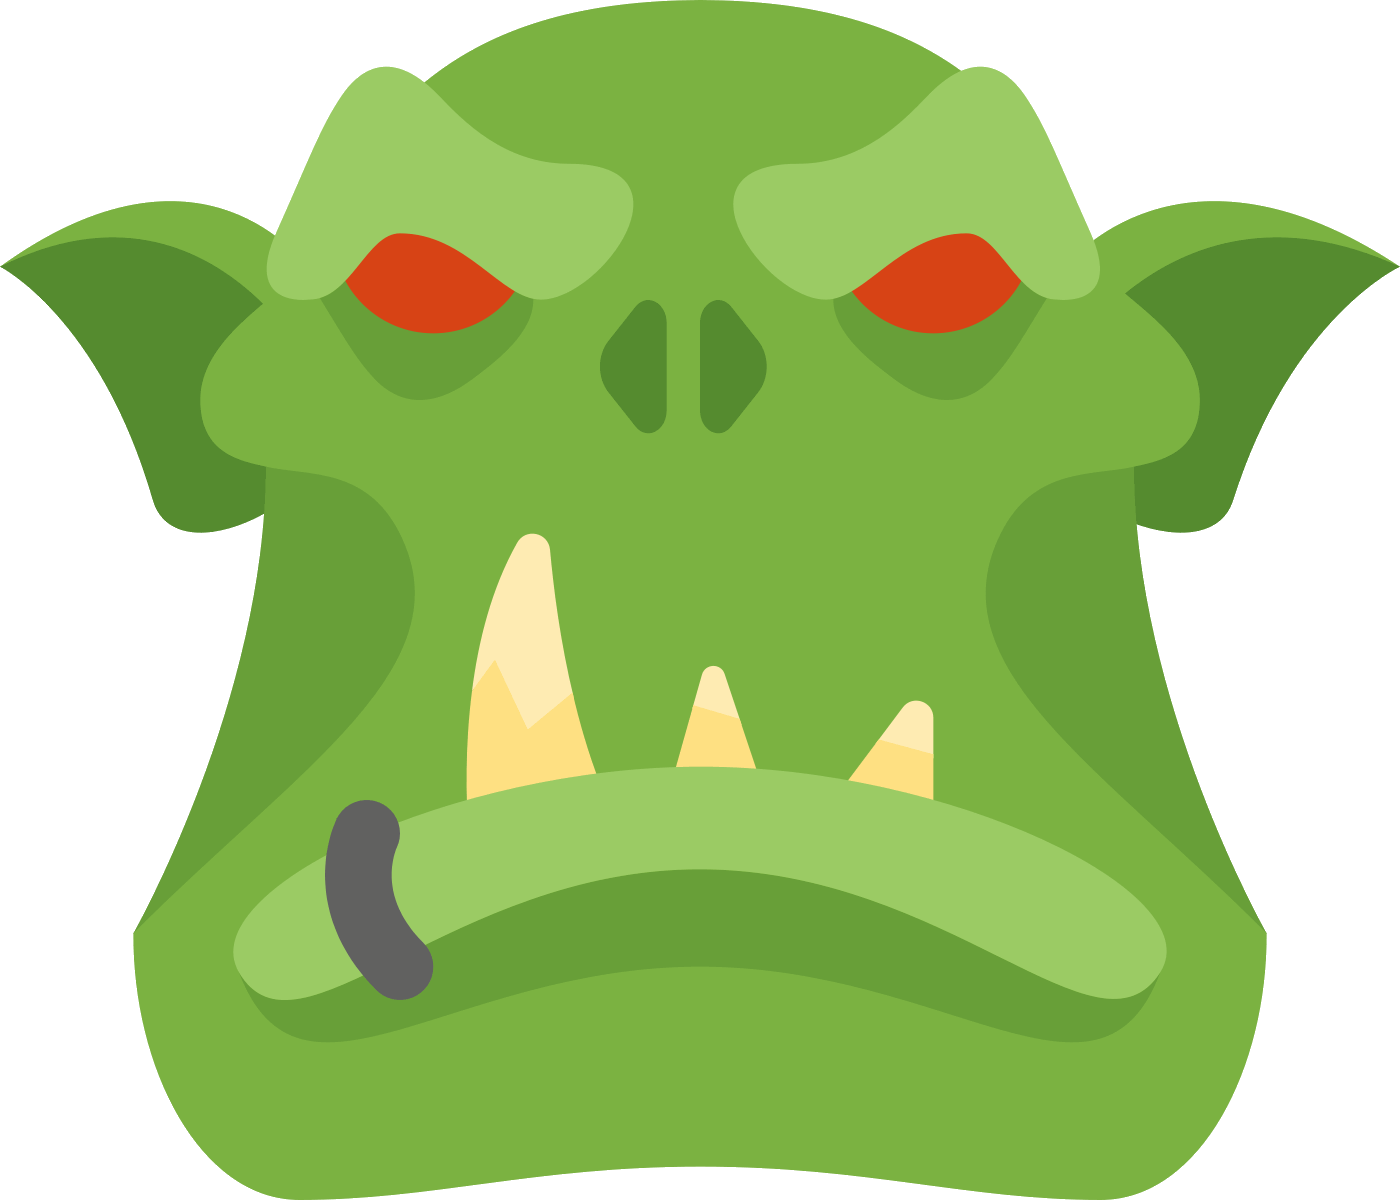 A Green Monster Face With Sharp Teeth And Sharp Teeth